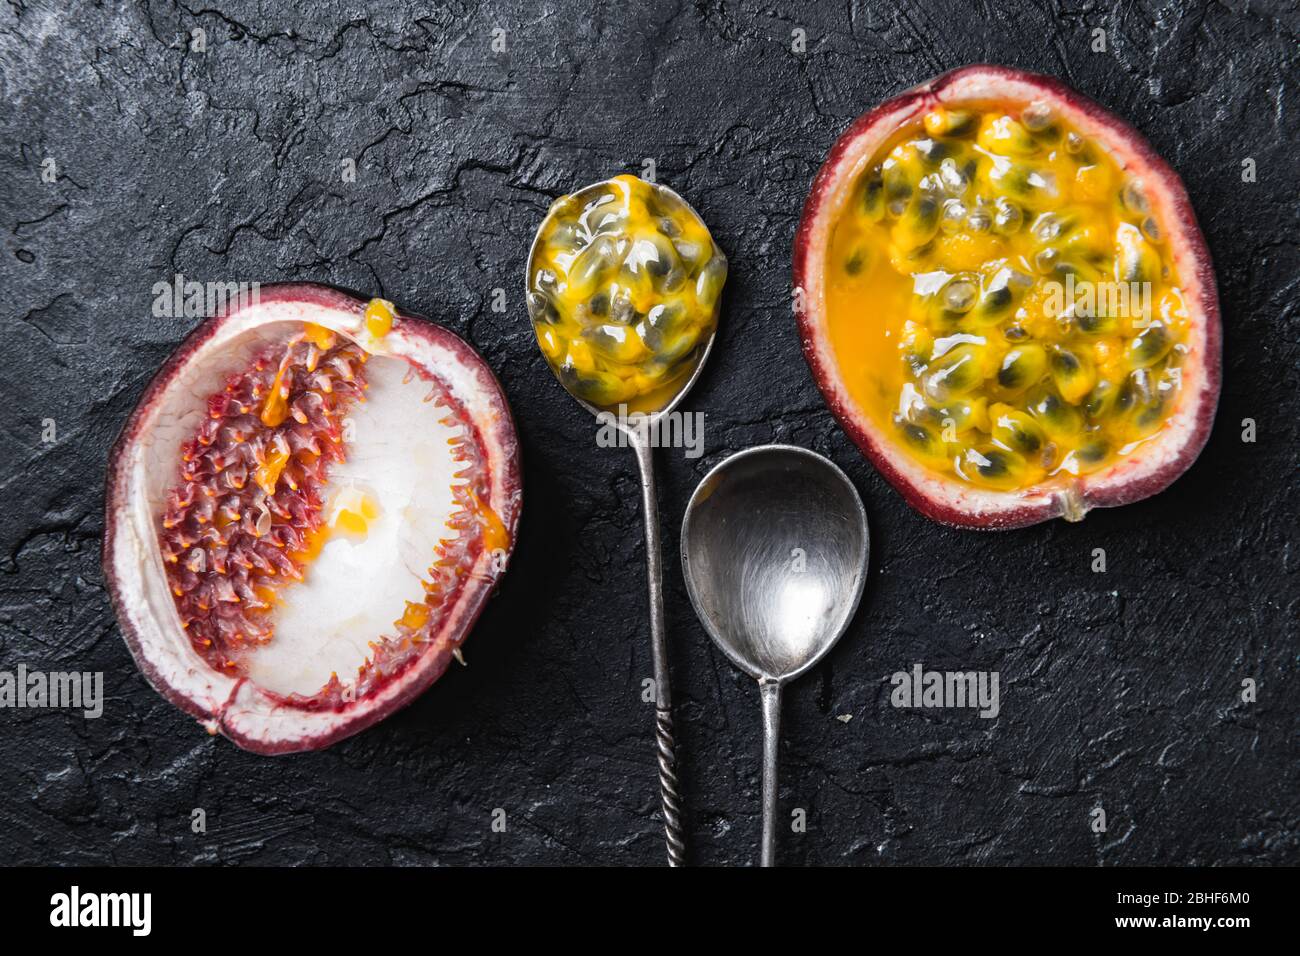 Slised passion fruit with silver spoons on black concrete background. Food photography Stock Photo